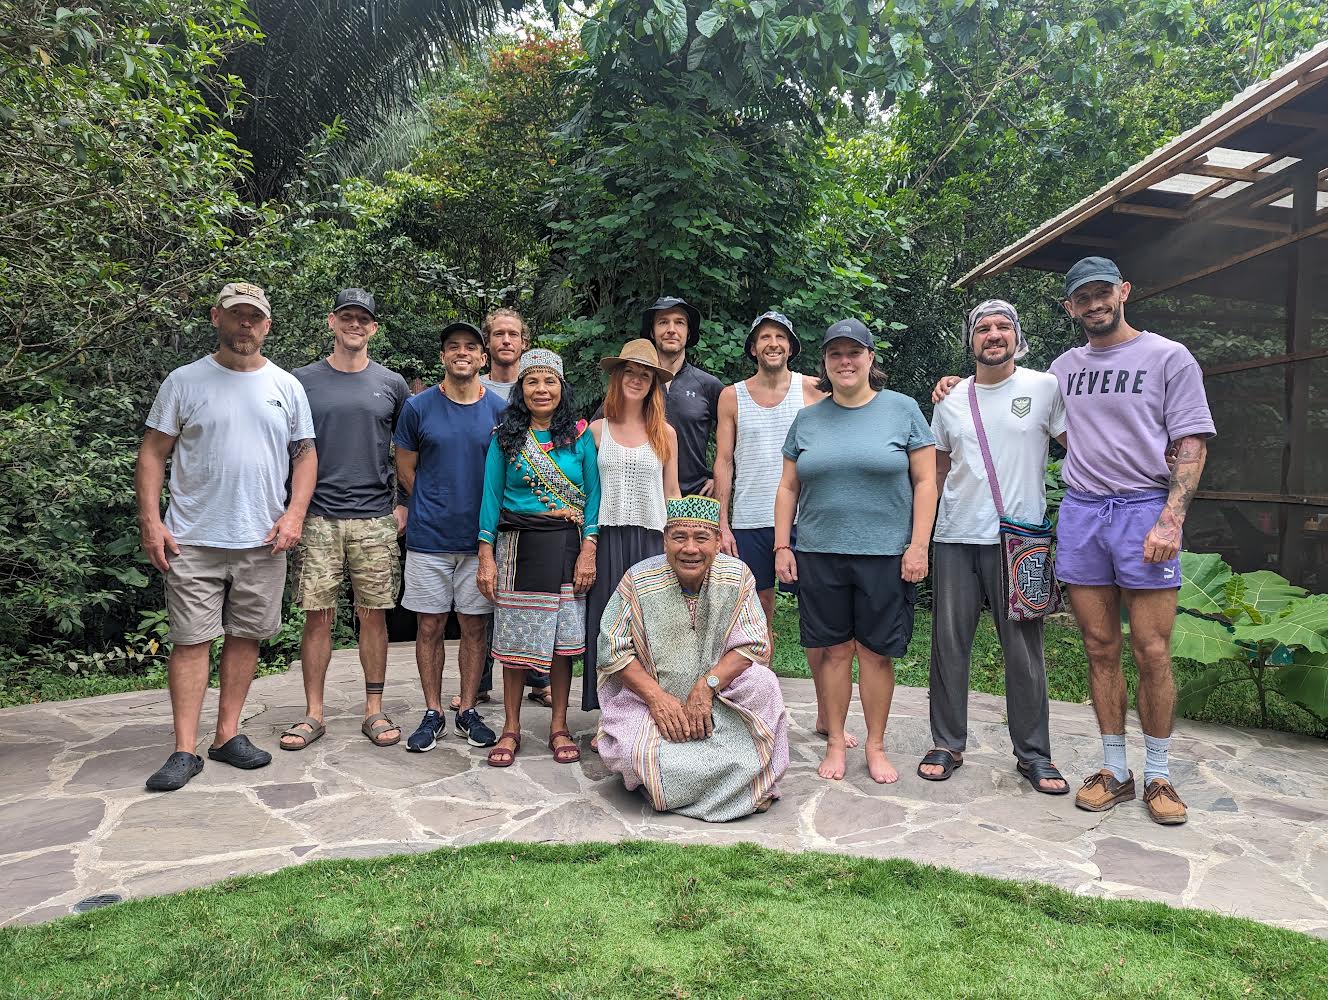 A group of 11 people on an ayahuasca retreat pose for a photo on a cobbled path with trees in background